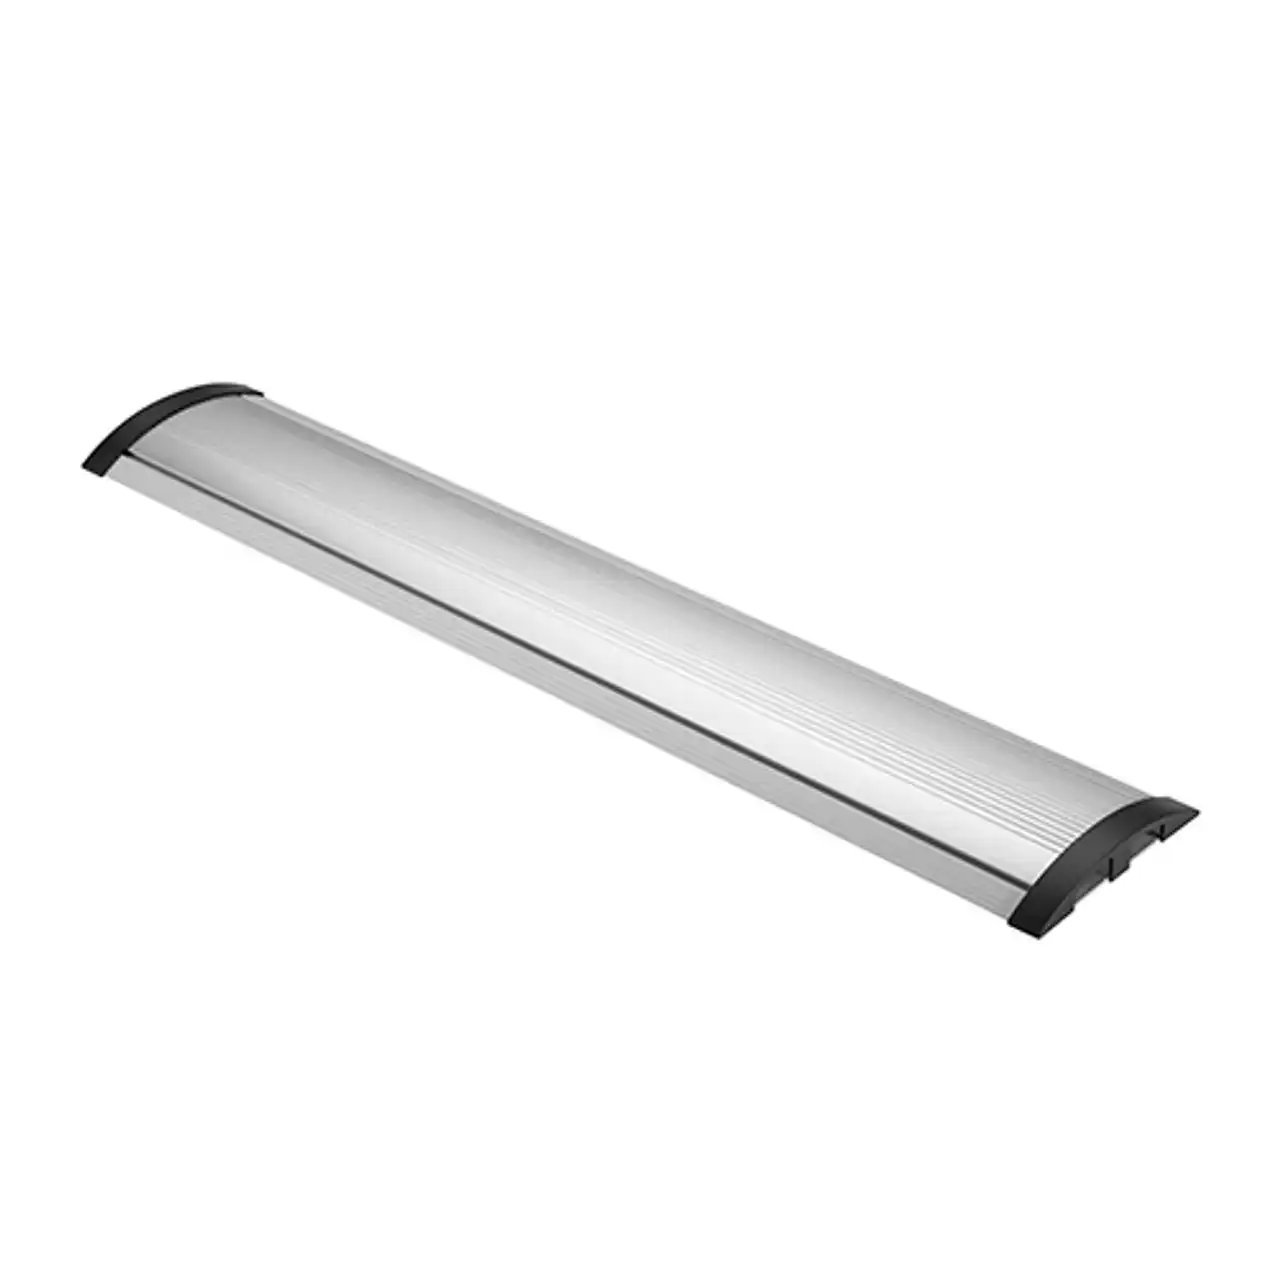 Brateck Aluminum Floor Cable Cover 1604x139mm - Silver